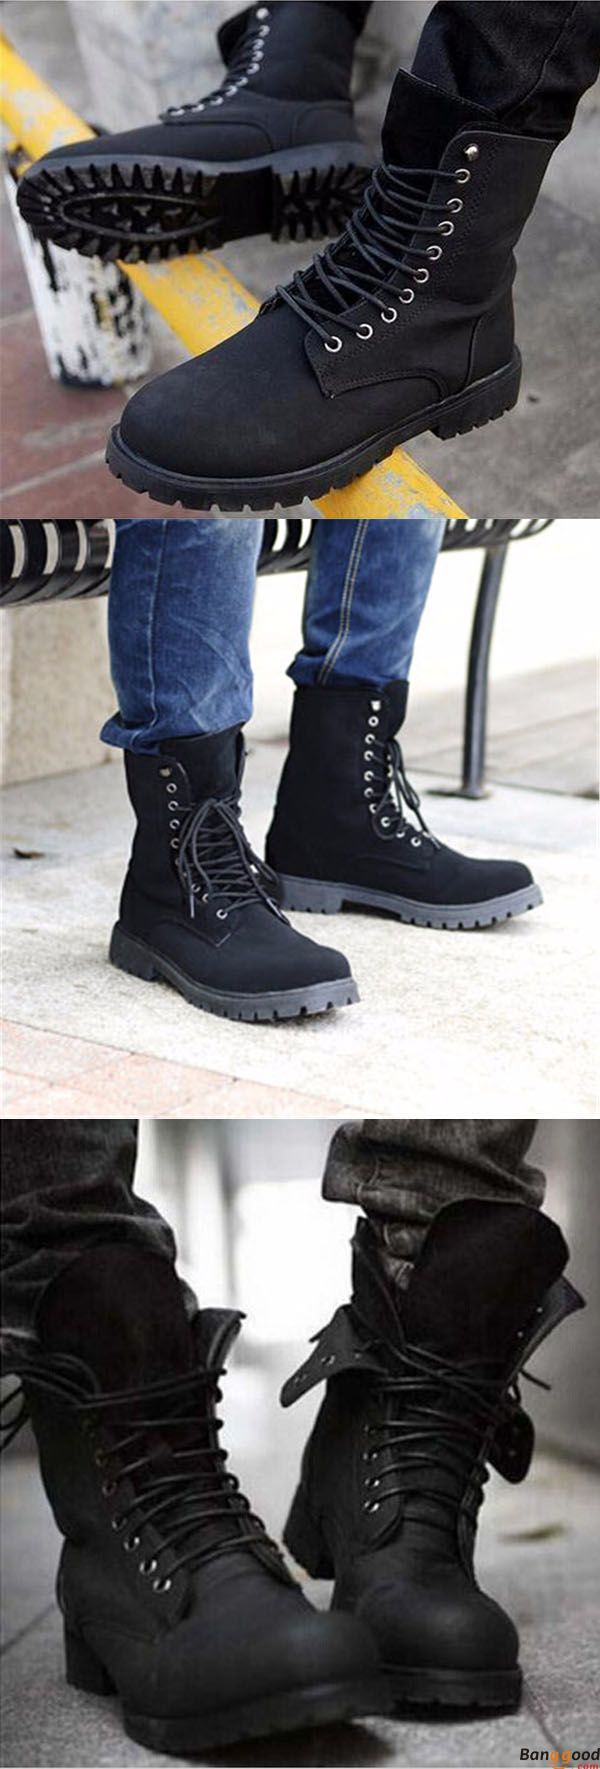 US$37.99 + Free shipping. Winter Boots, Men’s Boots, British Style Boots, Fash…